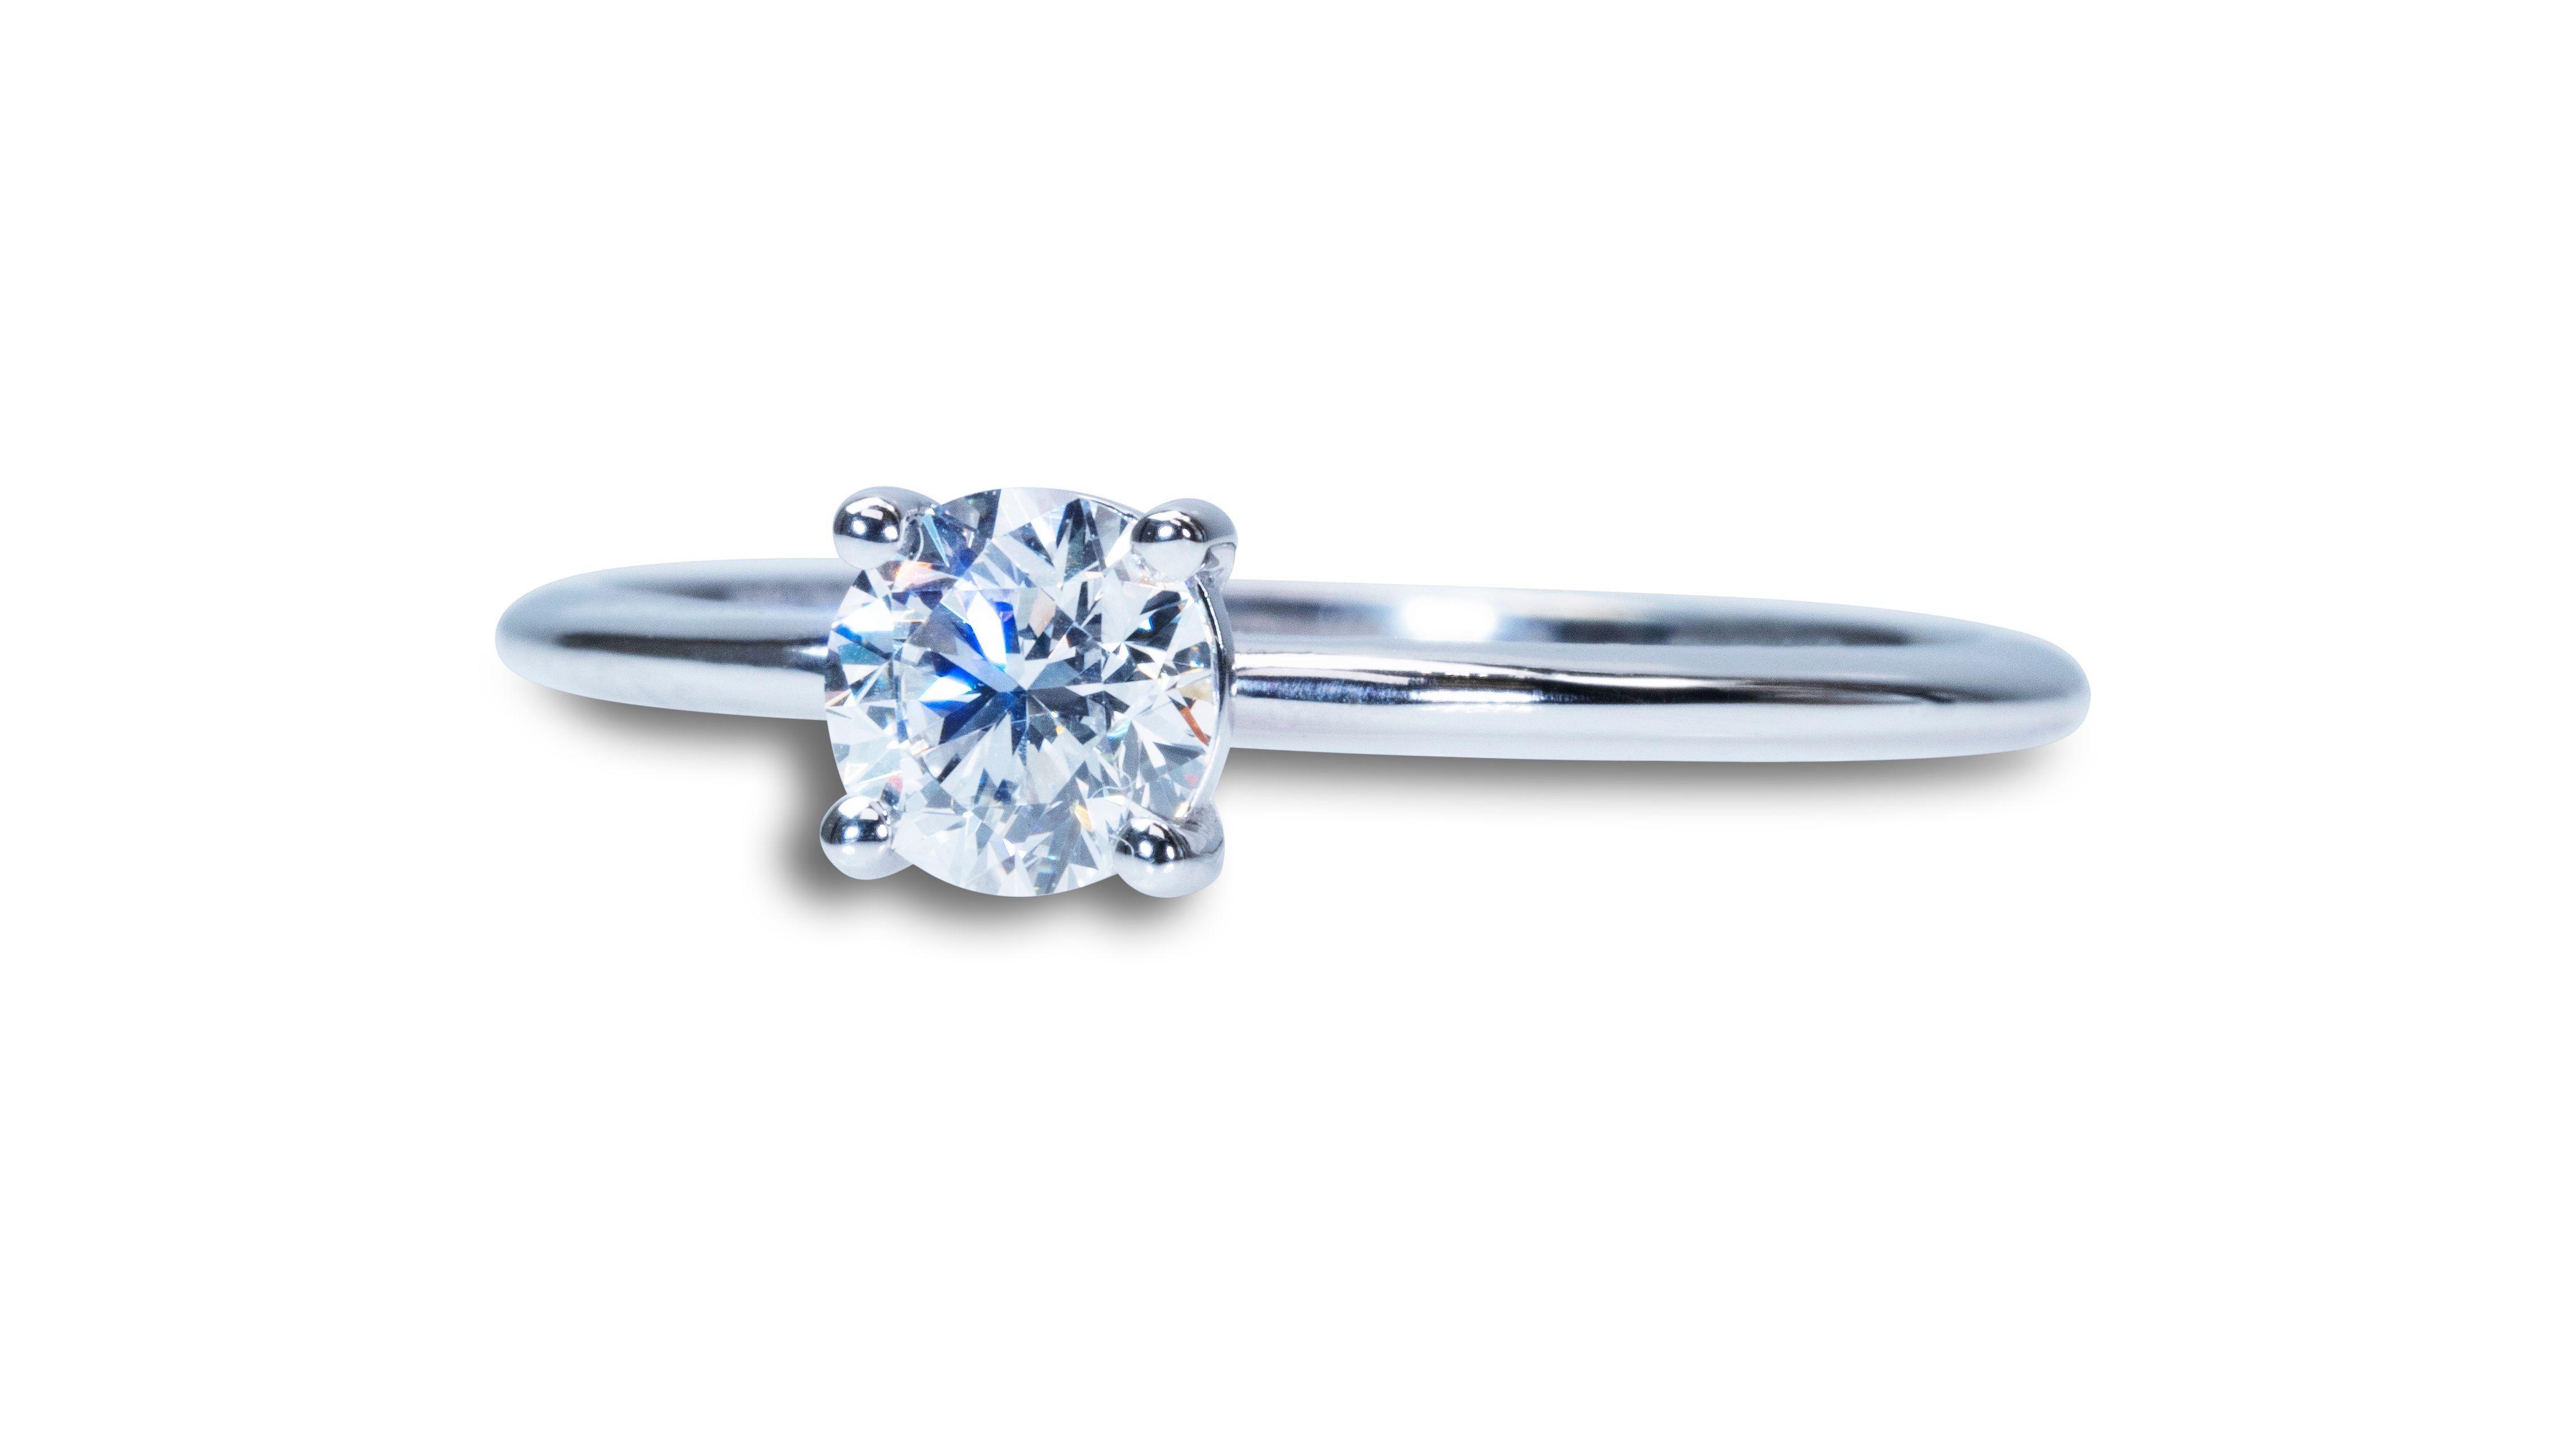 A beautiful classic solitaire ring with a dazzling 1 carat Round Brilliant natural diamond in EVVS2 quality and ideal cut what's means extremely bright and sparkles Natural Diamond. The jewelry is made of 18k white gold with a high quality polish.